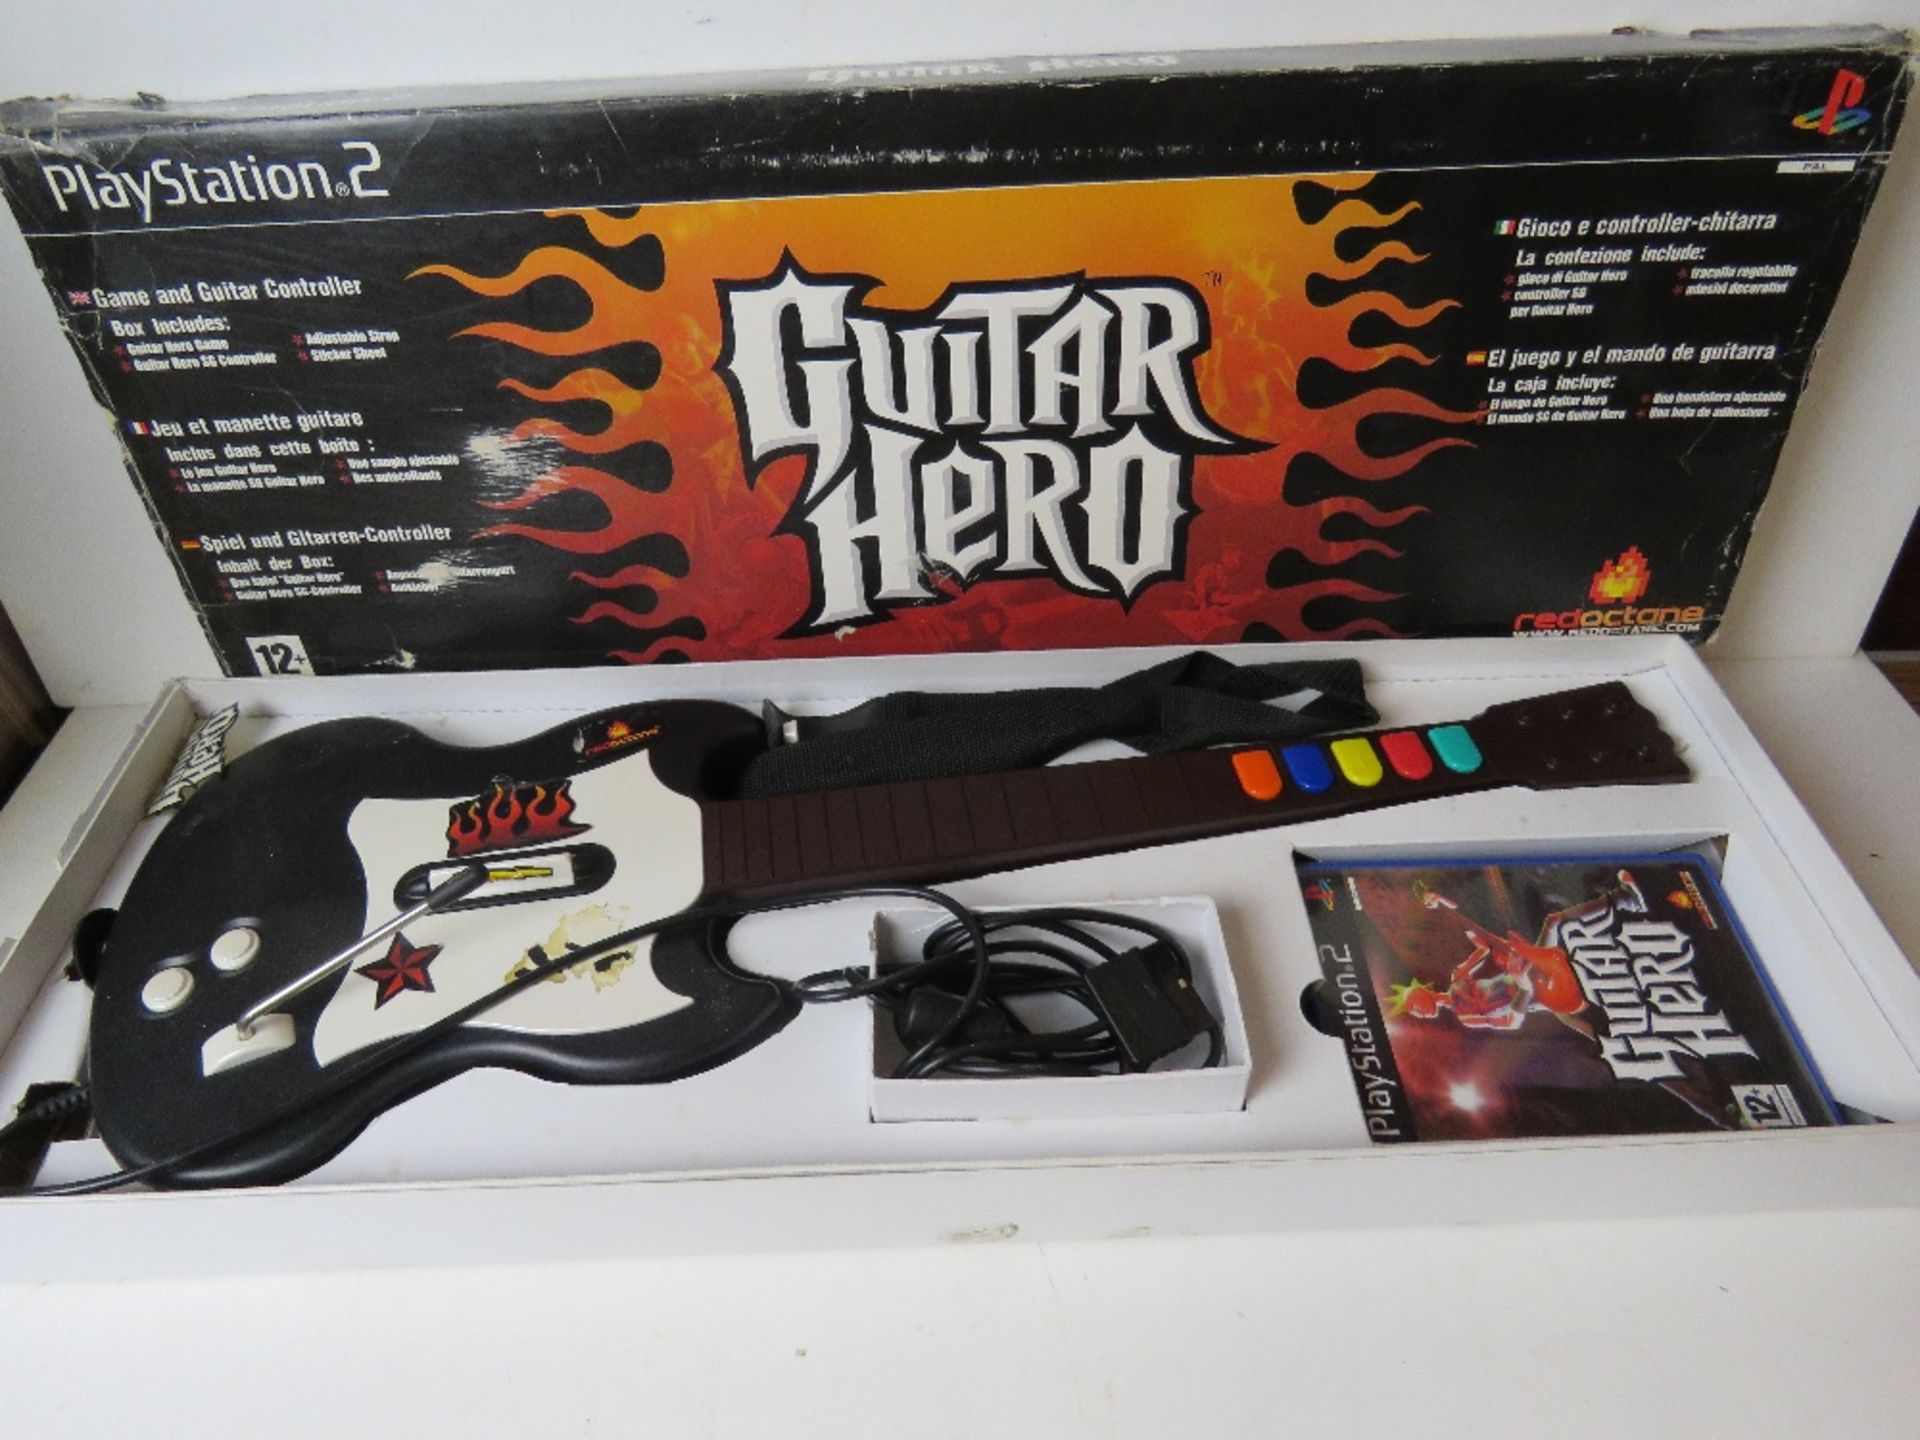 A Playstation 2 Guitar Hero with game in box.